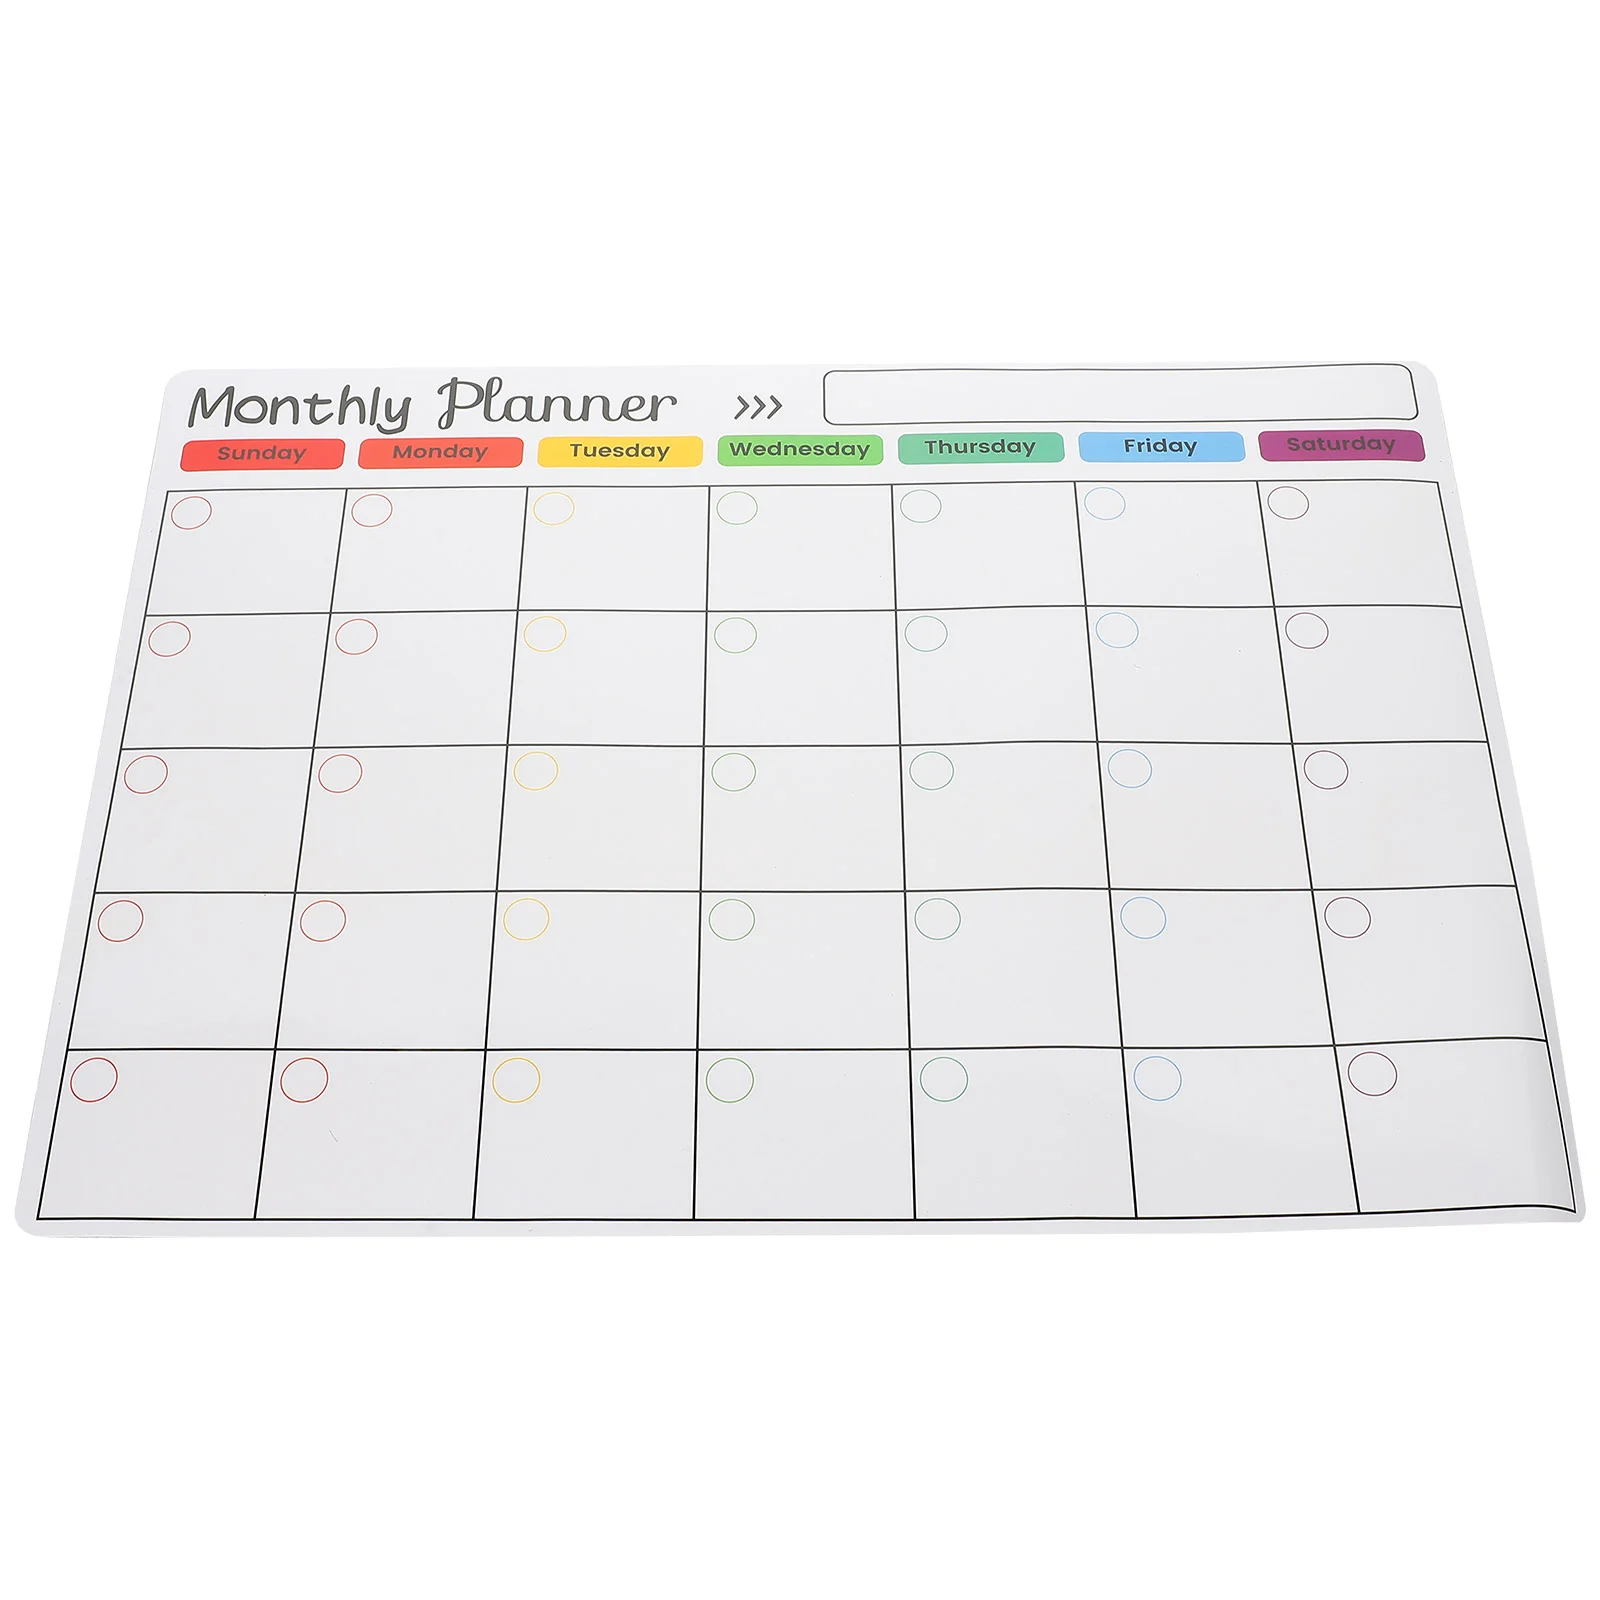 A3 Size Magnetic Weekly Monthly Planner Magnetic Whiteboard Fridge Magnet Flexible Daily Message Drawing Refrigerator Bulletin